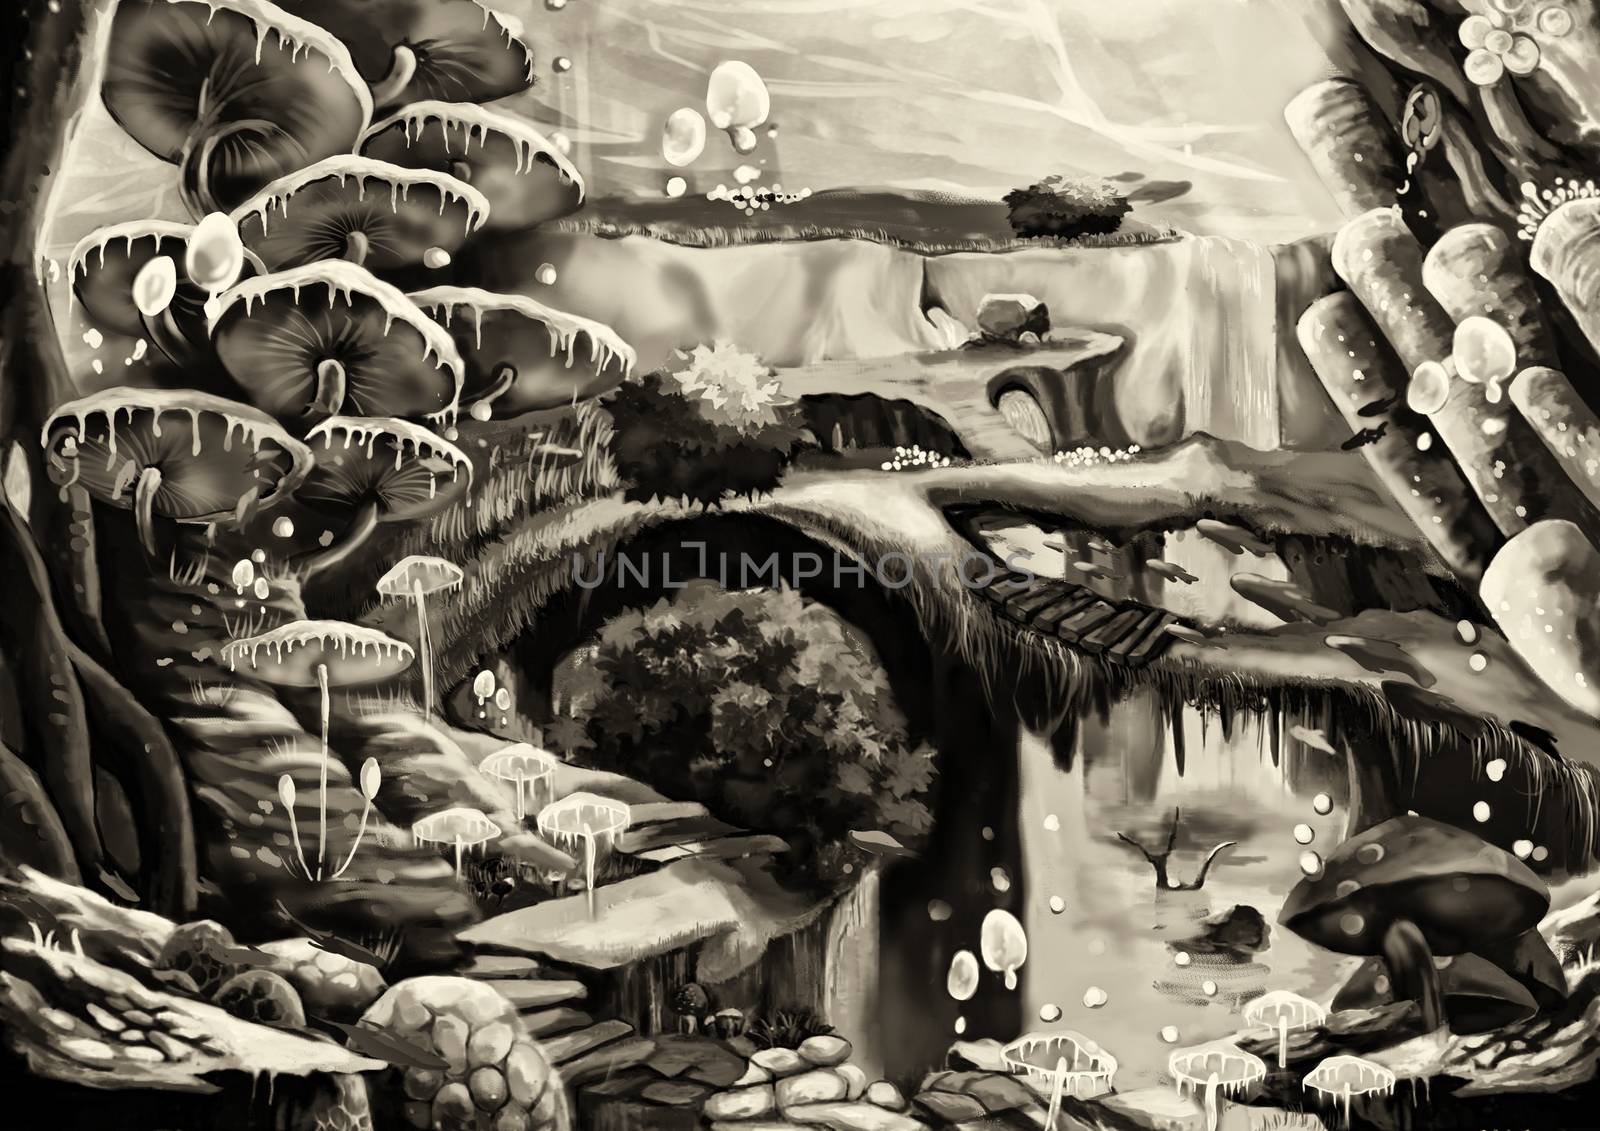 Illustration: Underwater Community Black and White Charcoal Version: Flying Fish; Bridge; Stone Stairs. A Harmonious Community. Story with Fantastic Cartoon Style Scene Wallpaper Background Design.